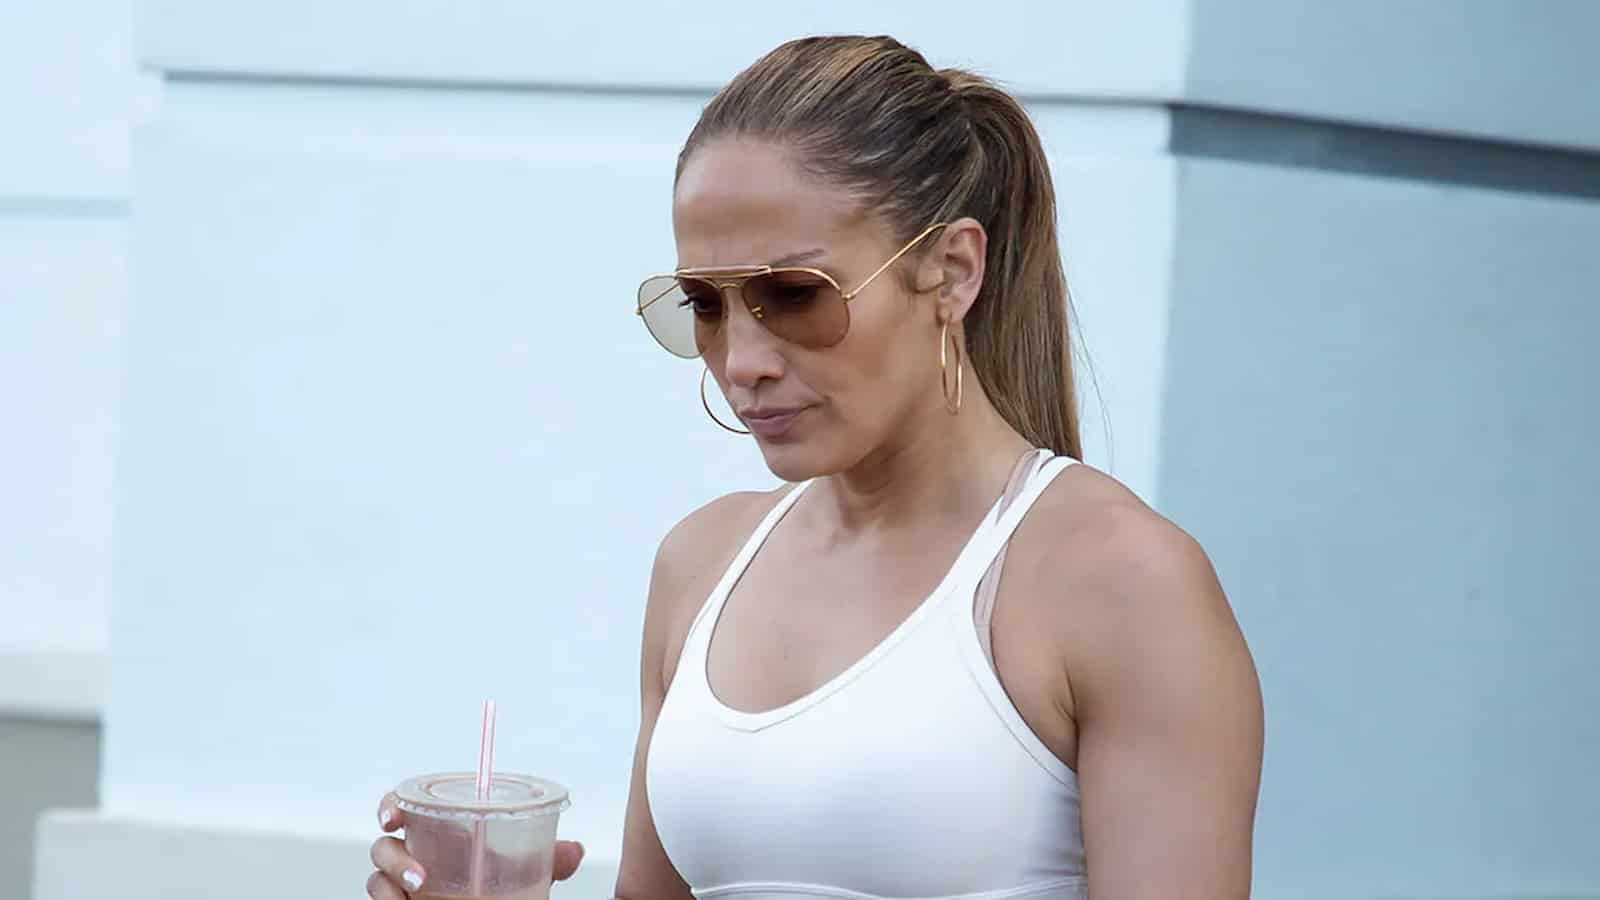 Does Jennifer Lopez drink rice water to lose weight?